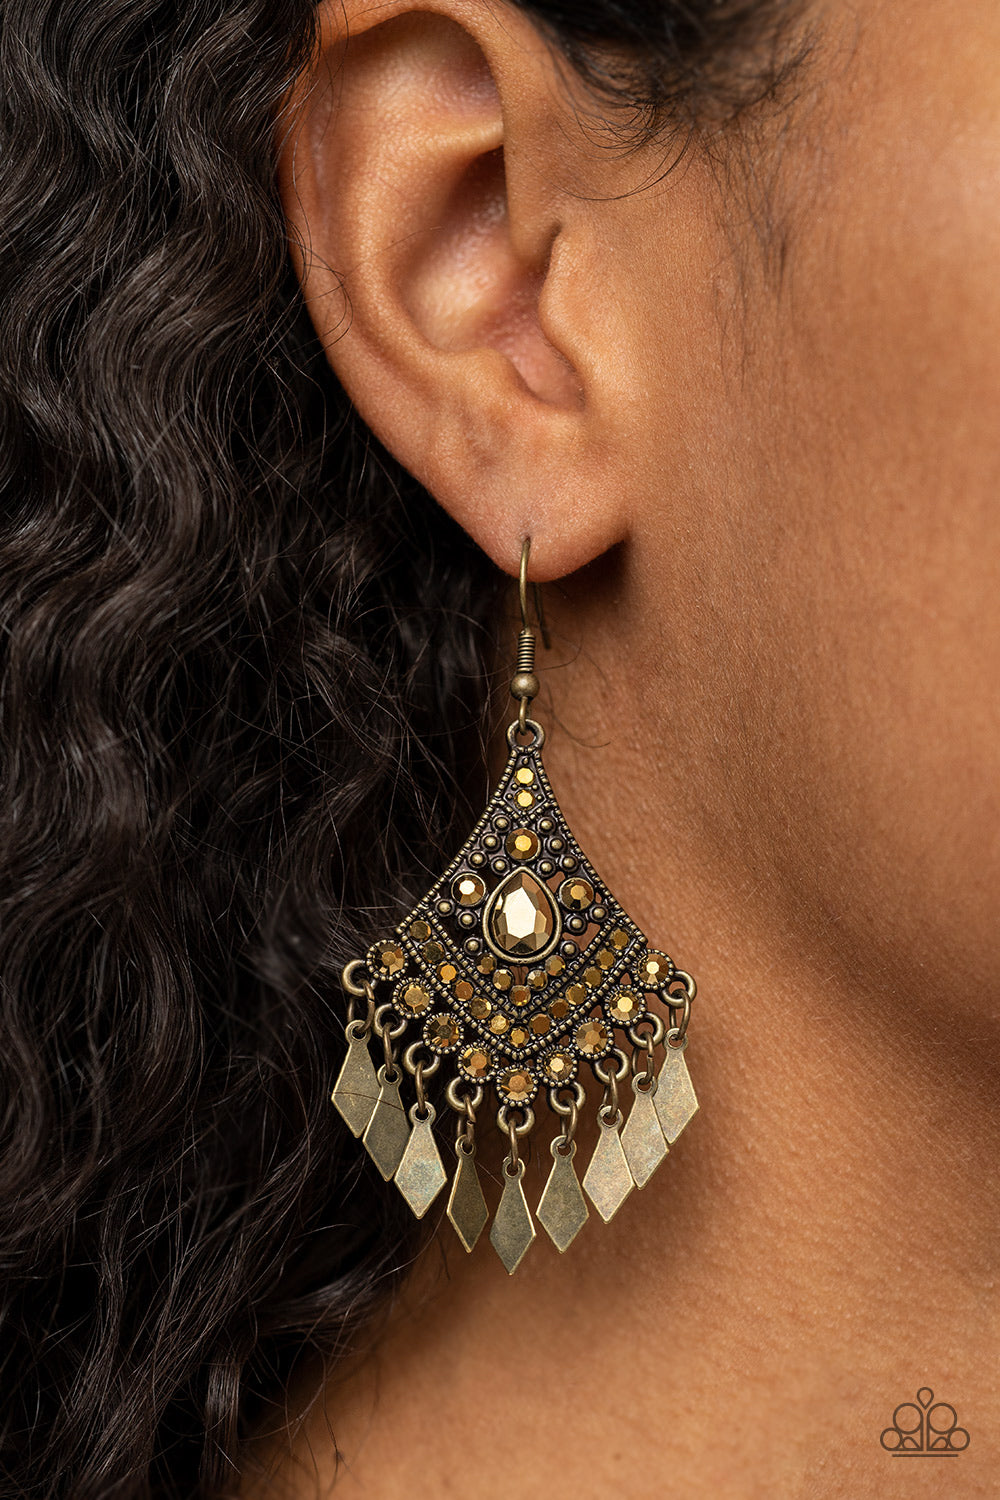 Indie Iridescence - Brass Earrings - Paparazzi Accessories